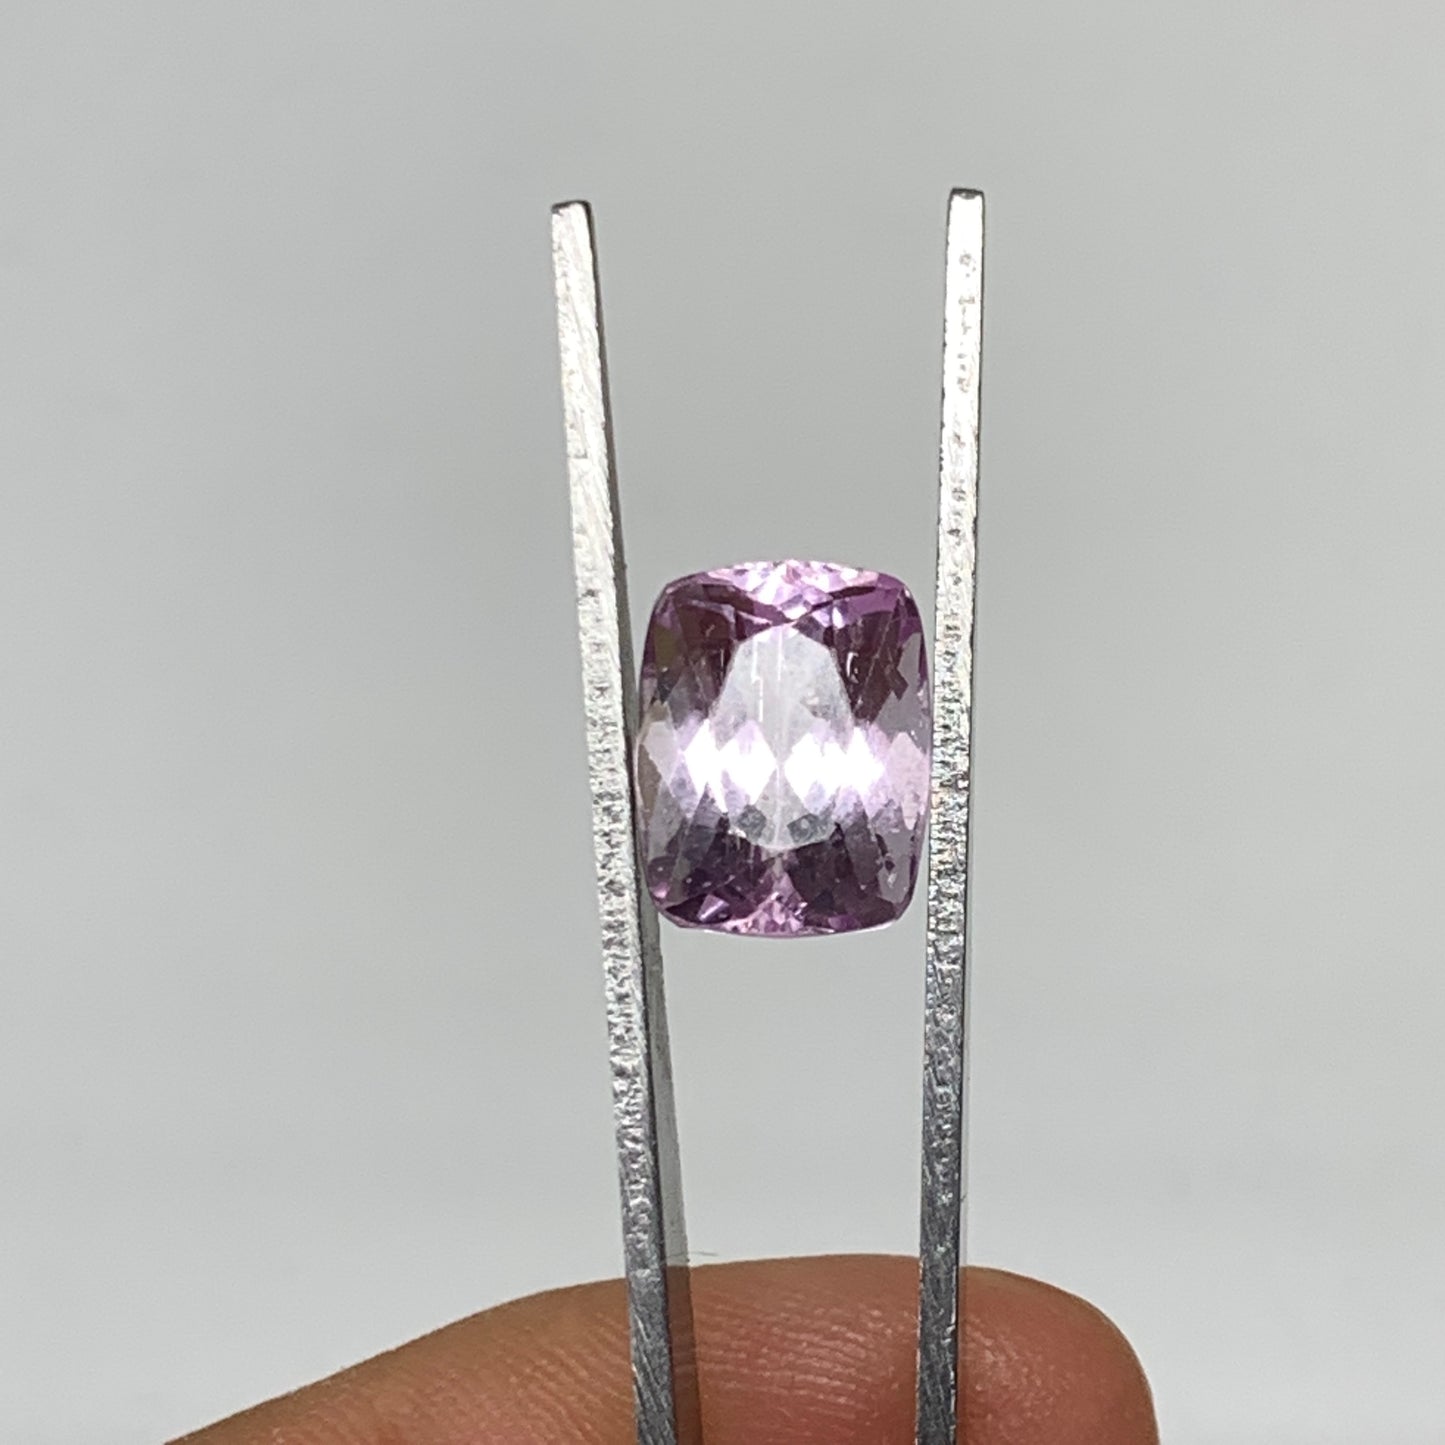 7.98cts, 12mmx9mmx8mm,Heated Kunzite Crystal Facetted Stone @Afghanistan,CTS237